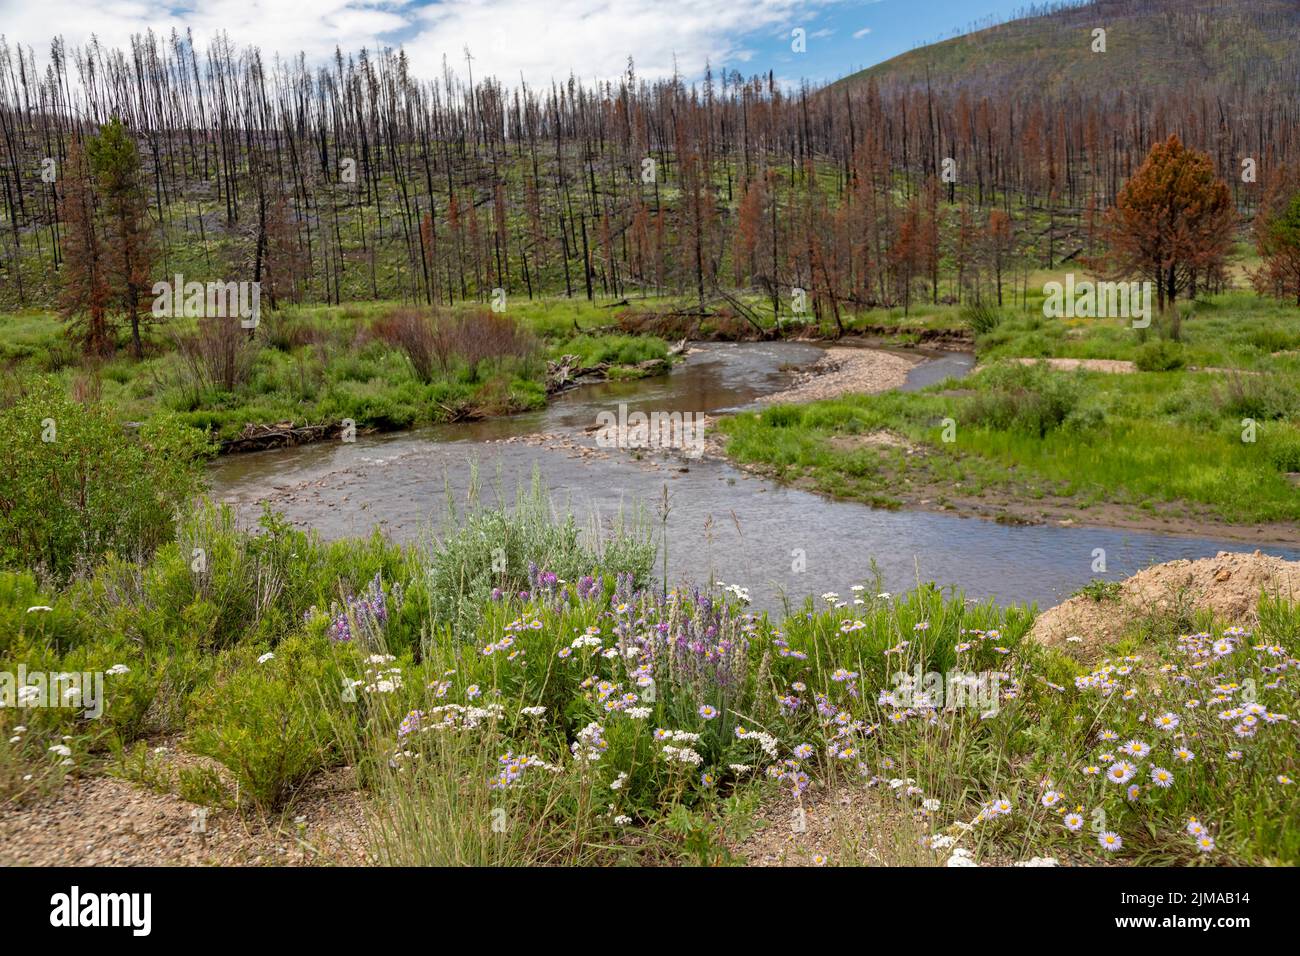 Grand County, Colorado - Wildflowers growing along a Willow Creeknearly two years after the East Troublesome Fire. The fire was one of the largest in Stock Photo